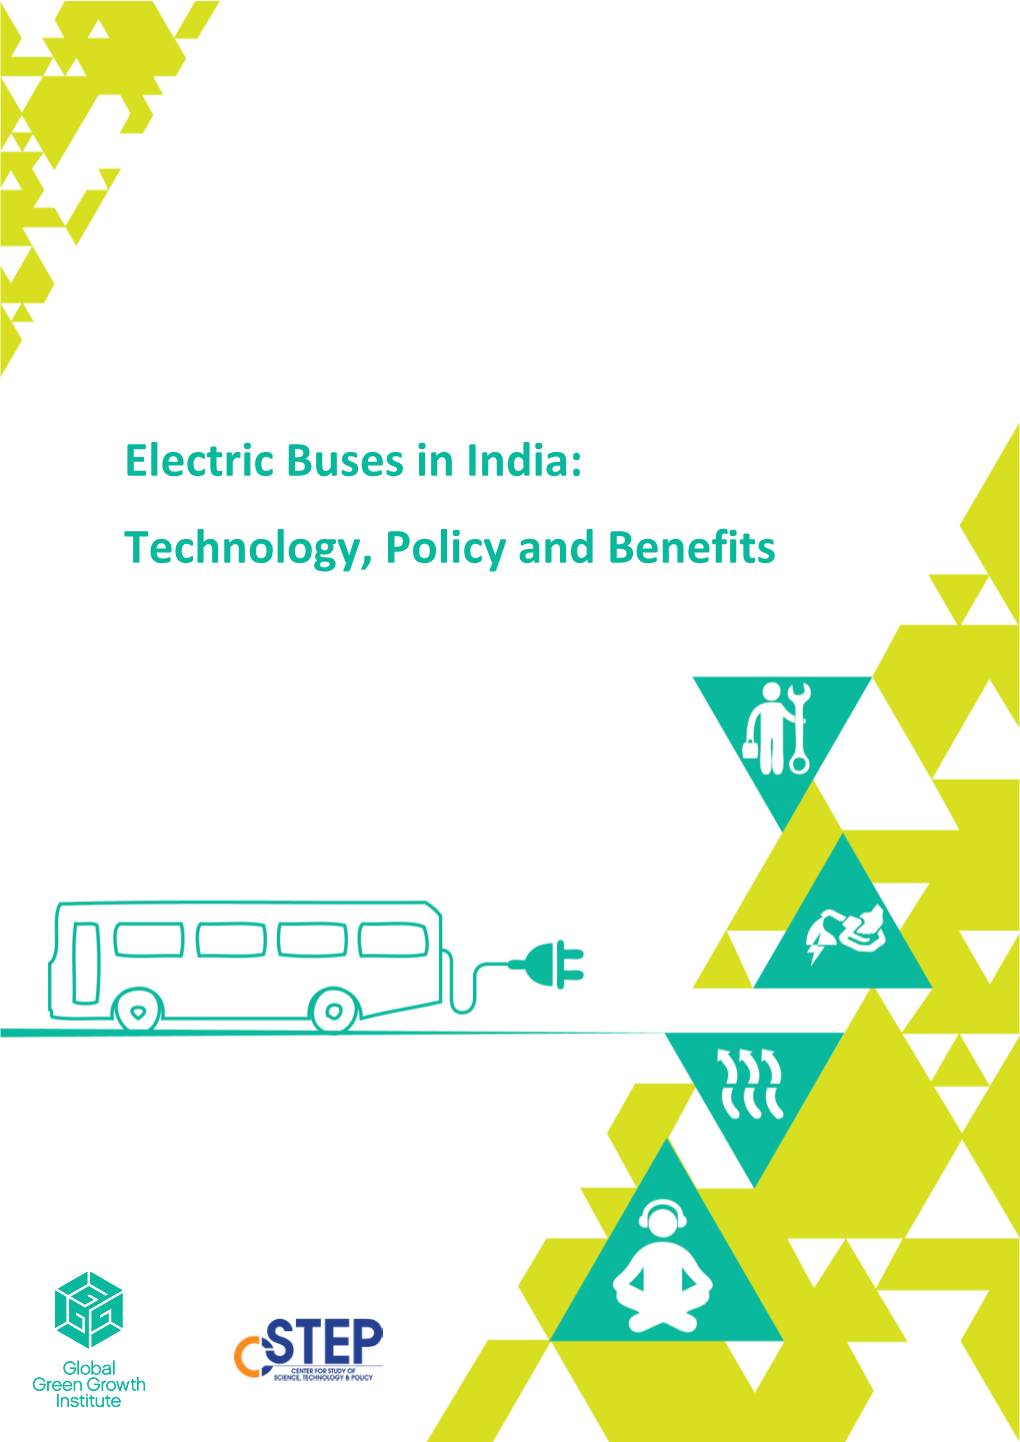 Electric Buses in India: Technology, Policy and Benefits